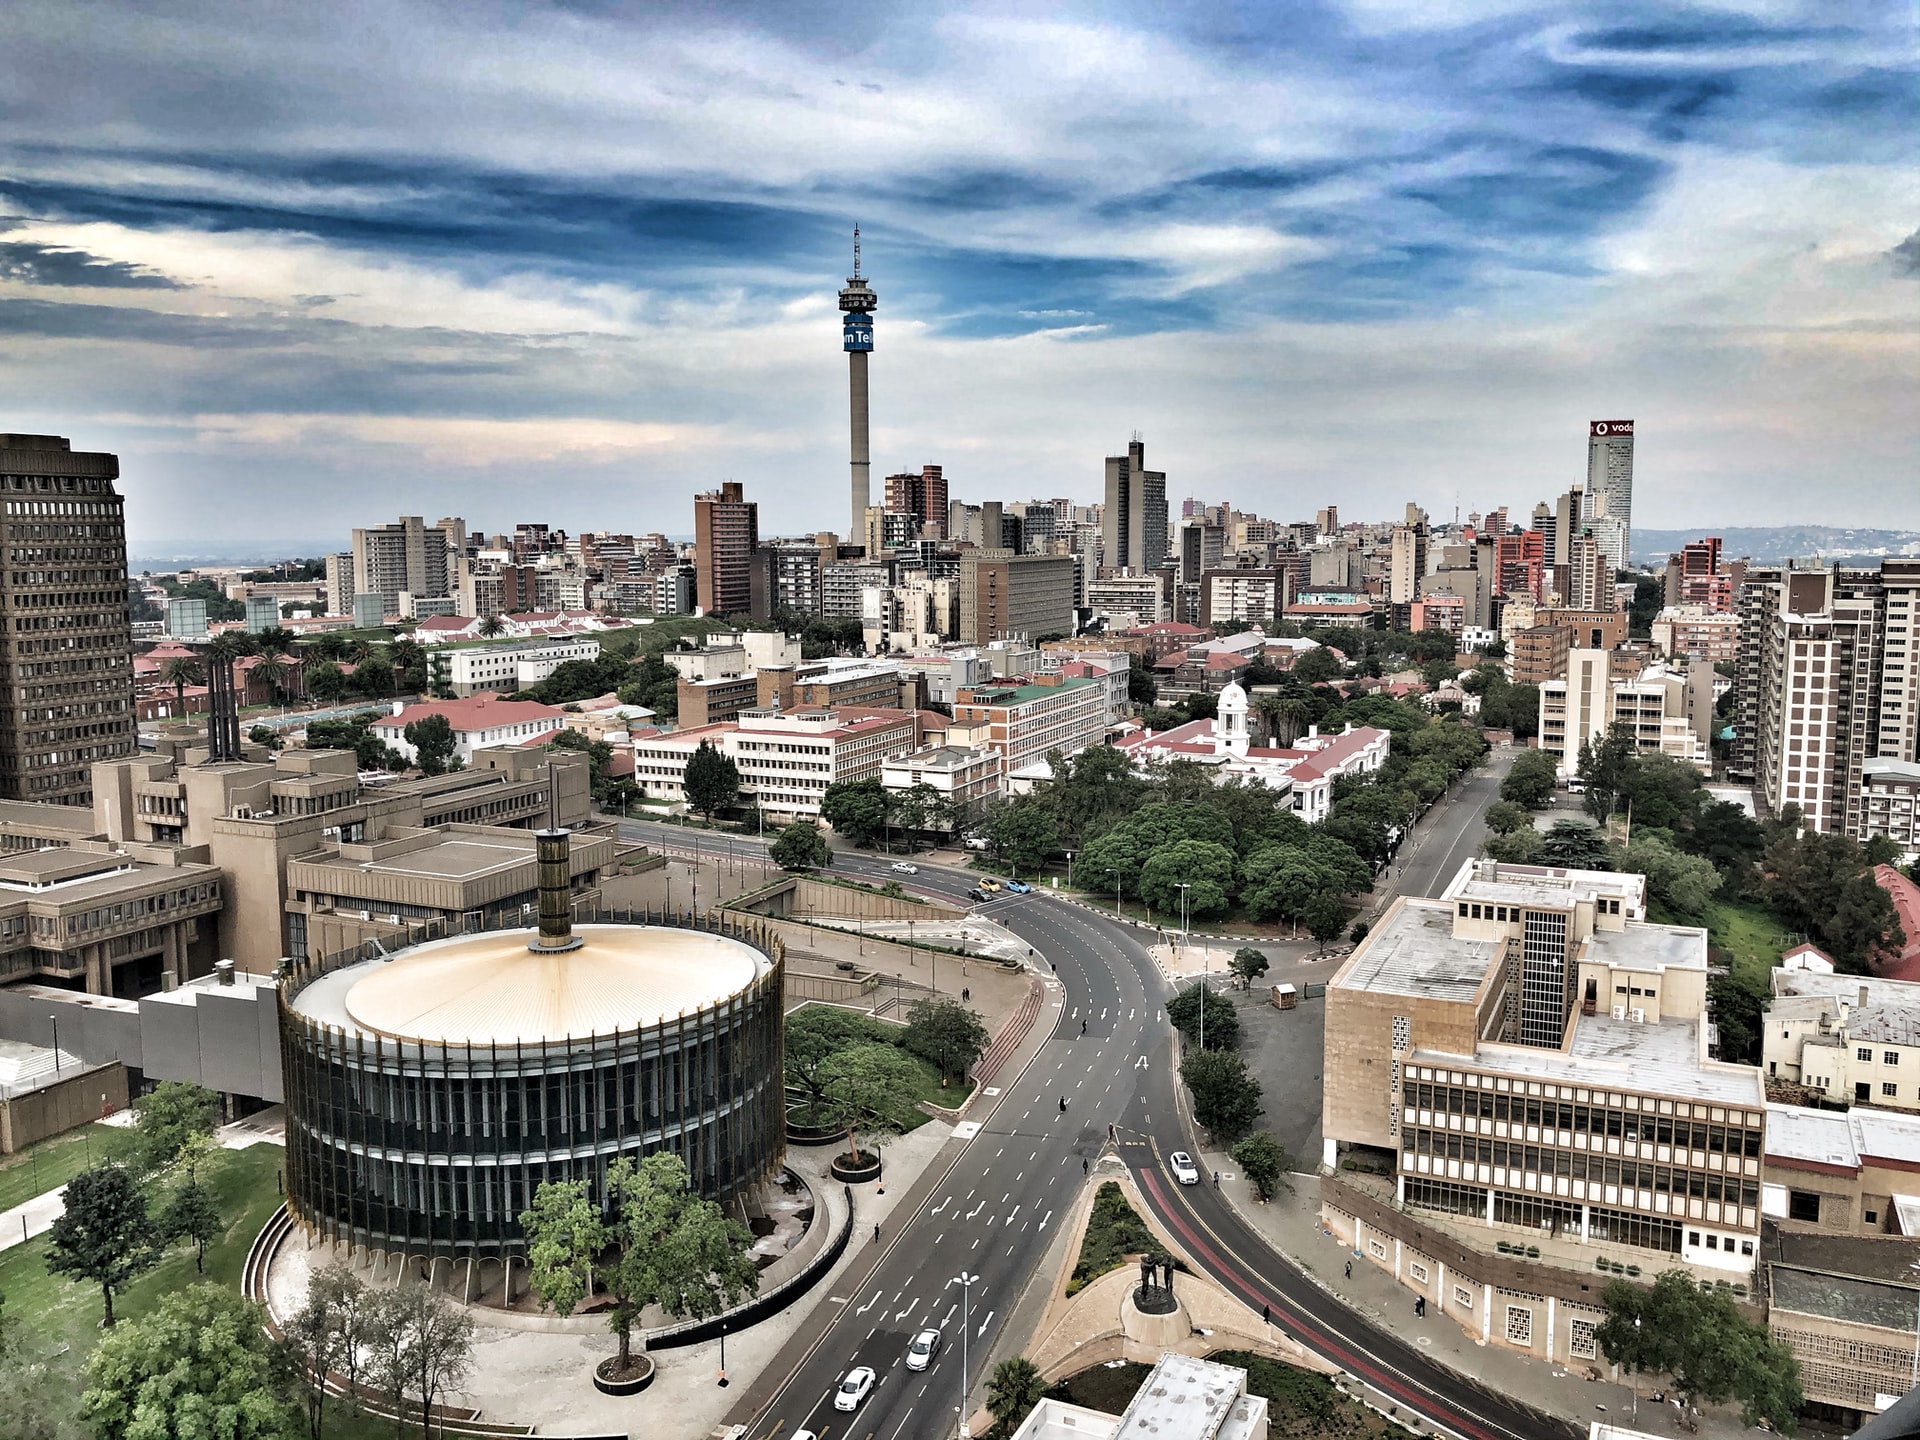 The Best Areas to Stay in Johannesburg, South Africa